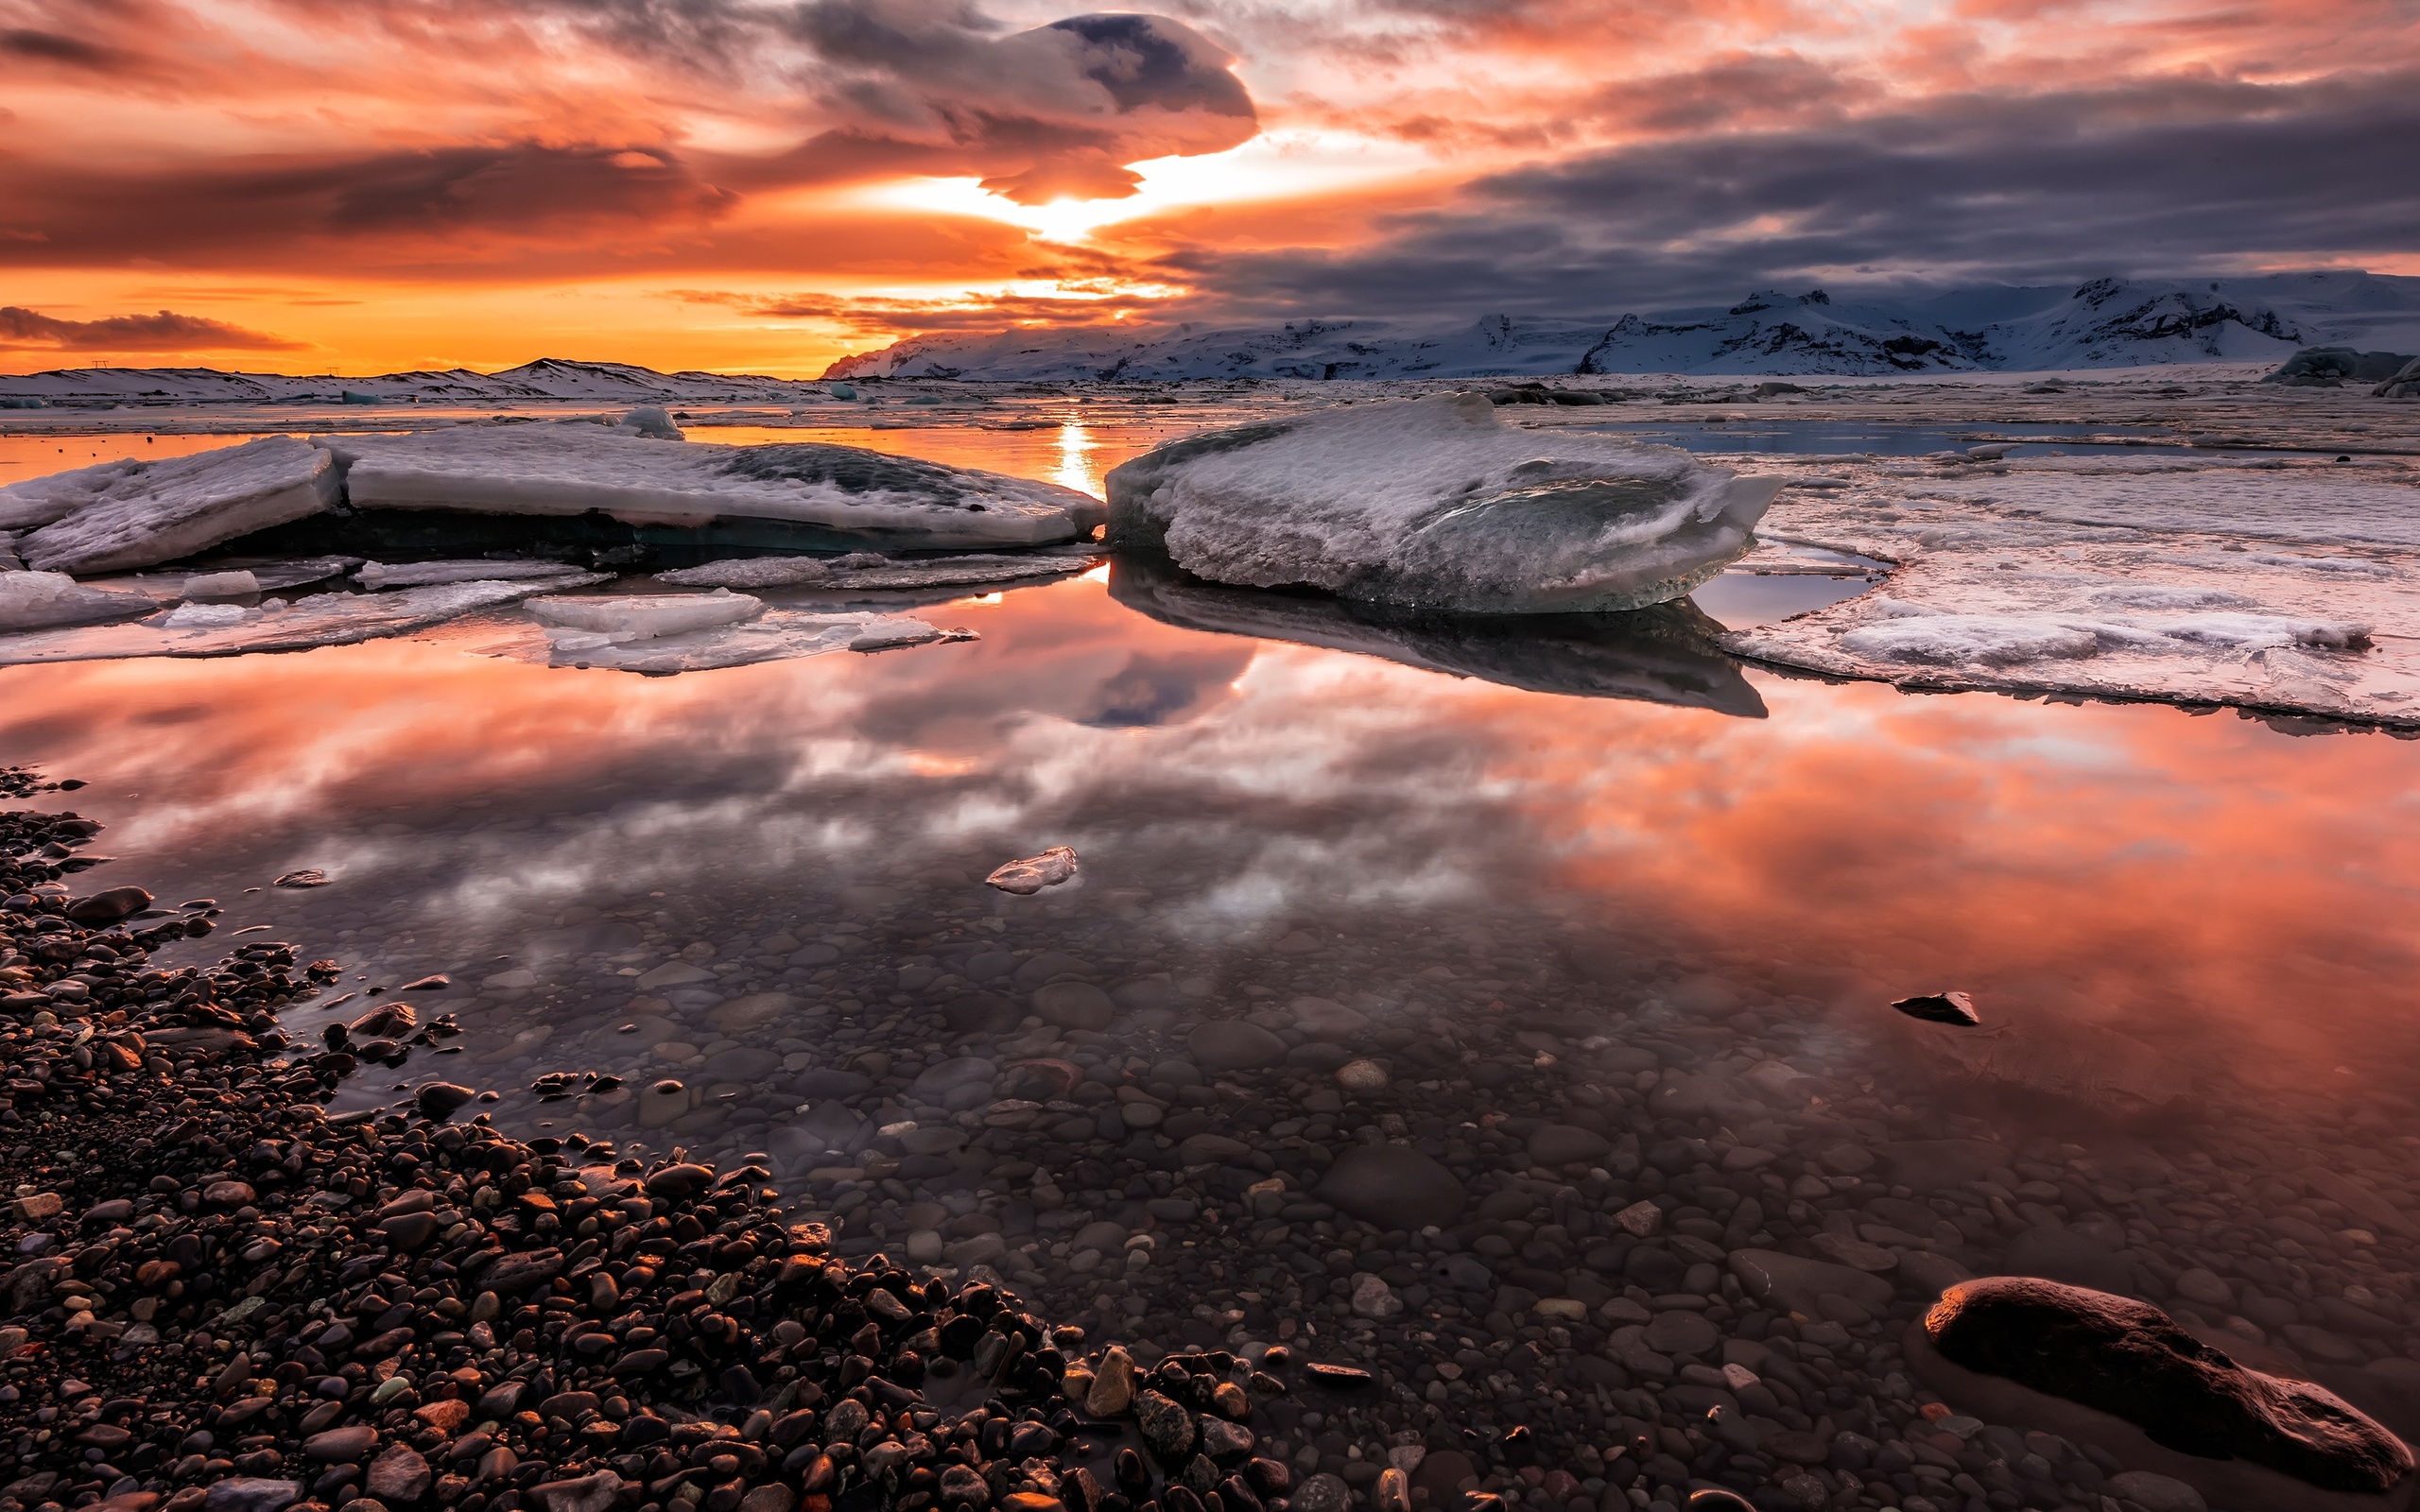 winter, the sky, the sun, clouds, snow, landscape, sunset, mountains, clouds, pebbles, reflection, stones, shore, ice, the evening